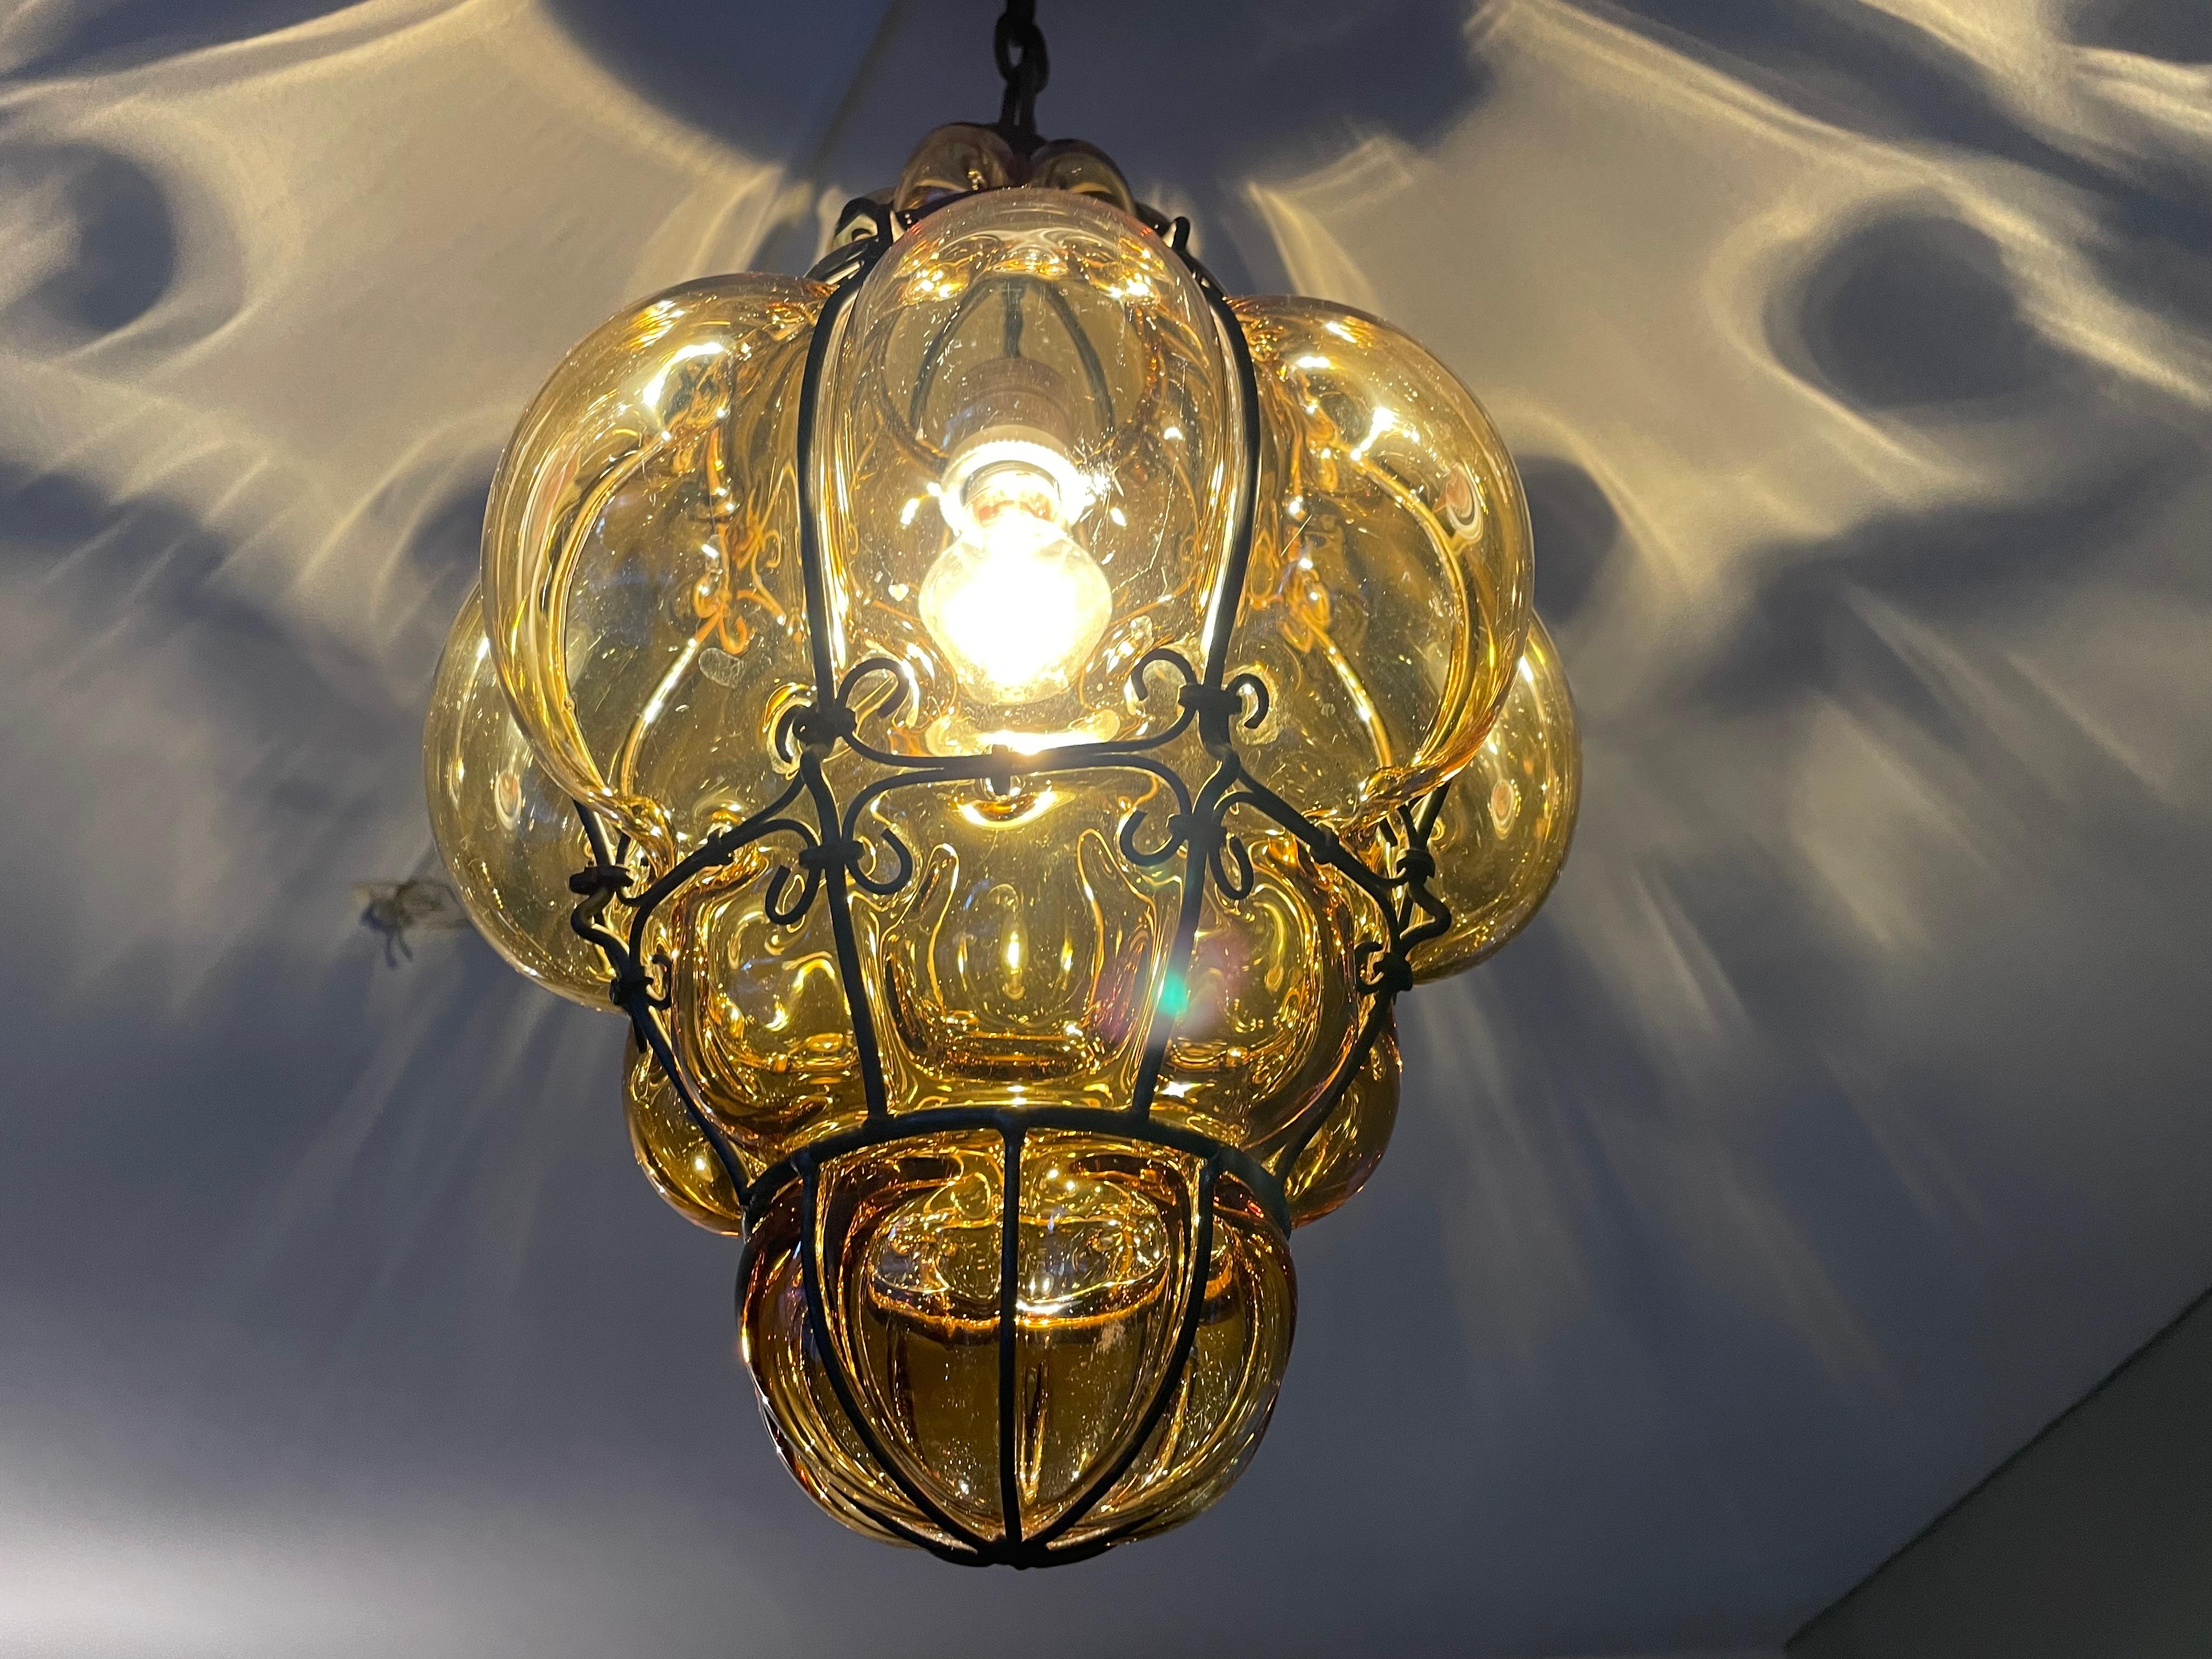 Superb condition and great color antique Murano pendant.

If you are looking for a truly handcrafted and stylish fixture to grace your living space then this antique Venetian specimen could be perfect. With early 20th century lighting as one of our